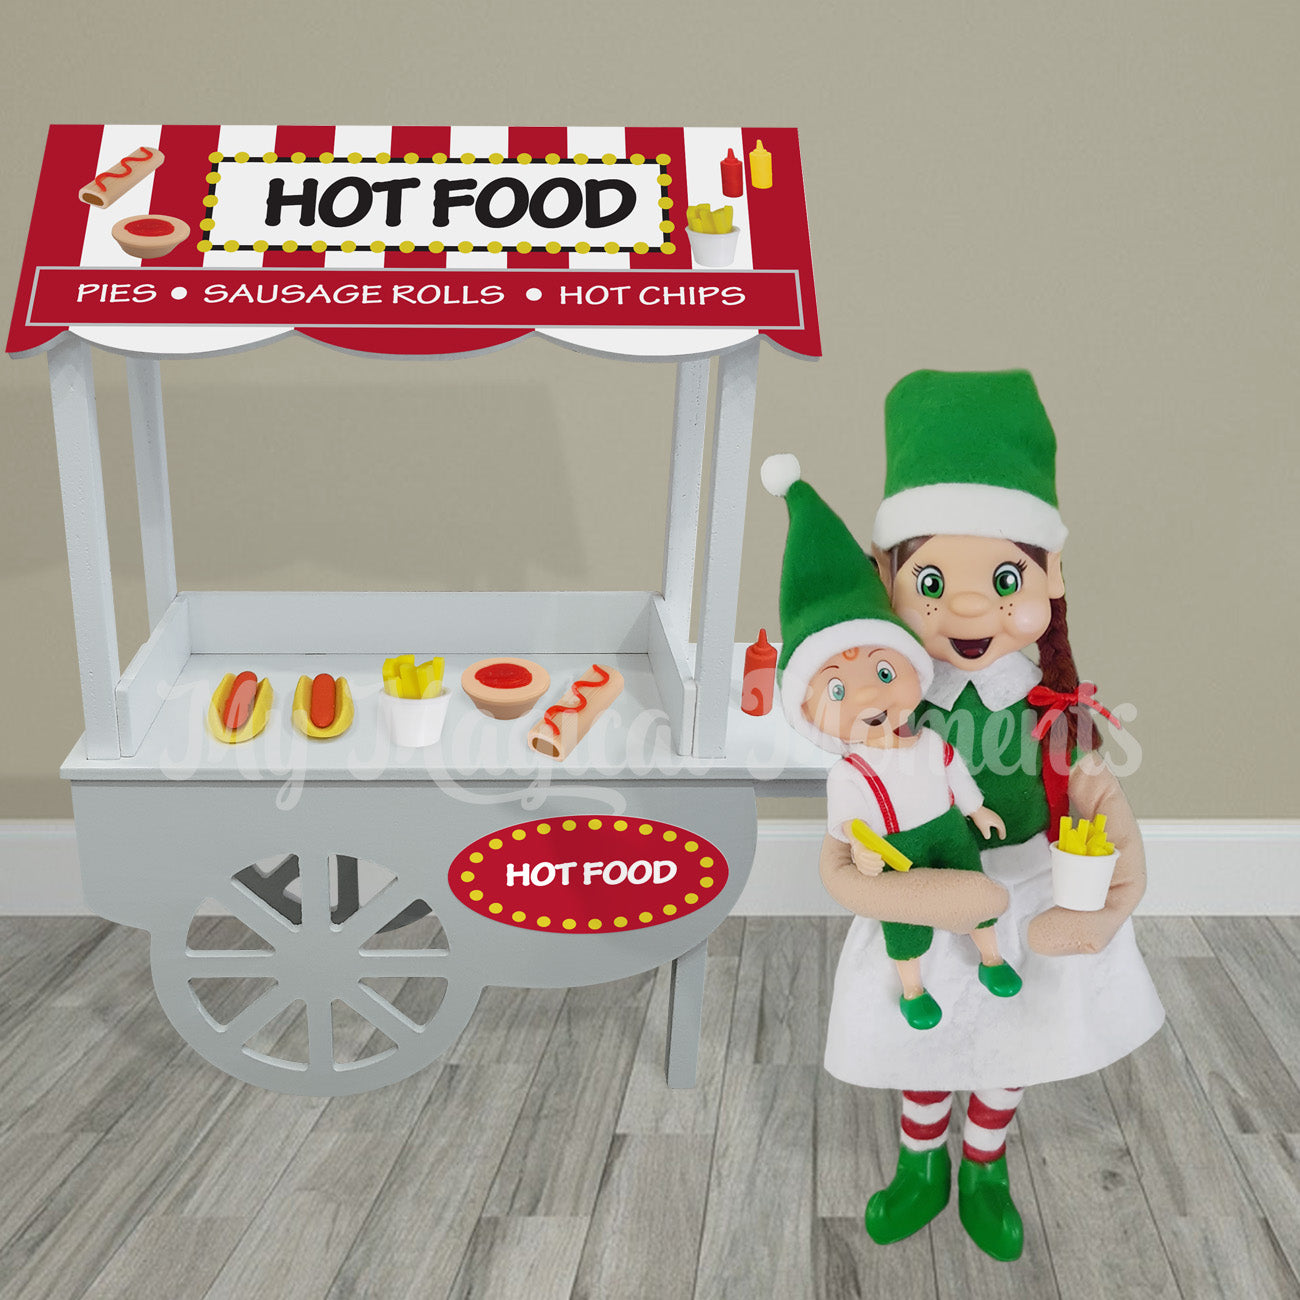 Mother elf holding toddler and chips in front of a hot food store